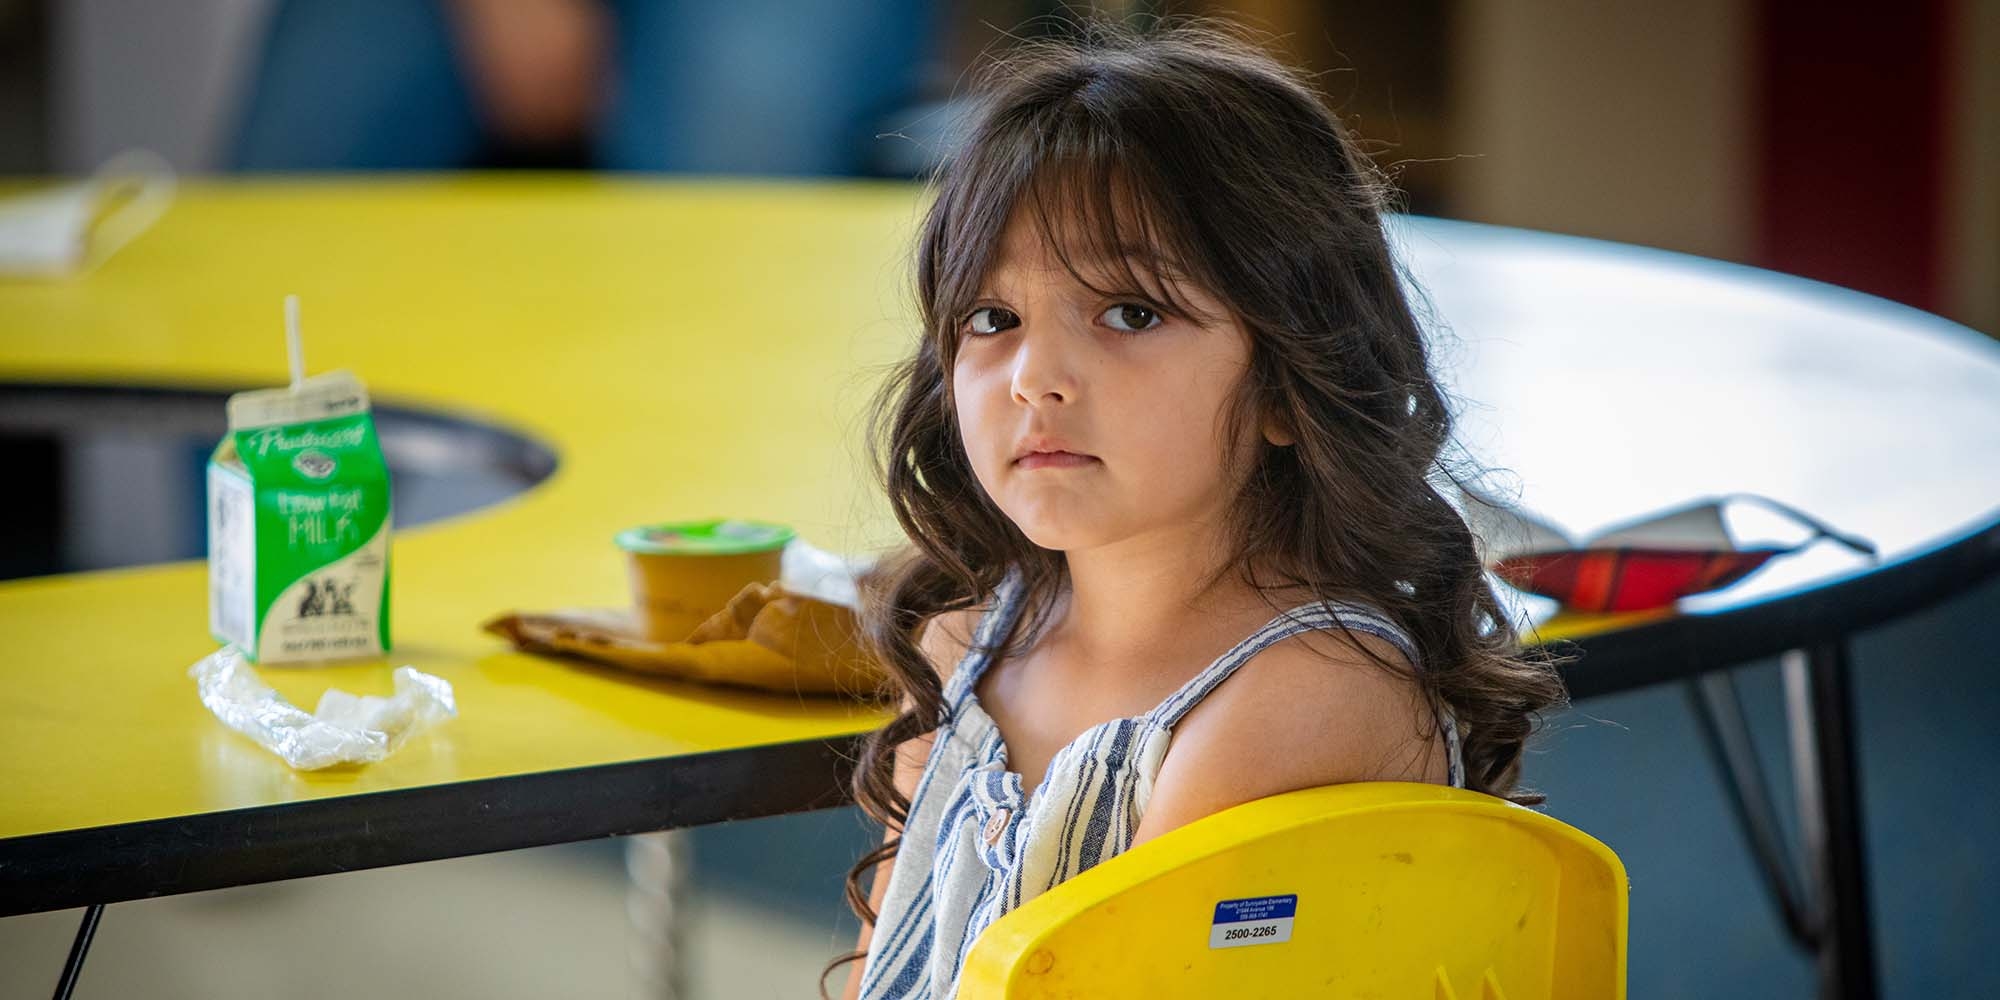 5-year-old Alexa takes a break from eating breakfast on Friday, May 27, 2021 in her pre-school classroom in California.